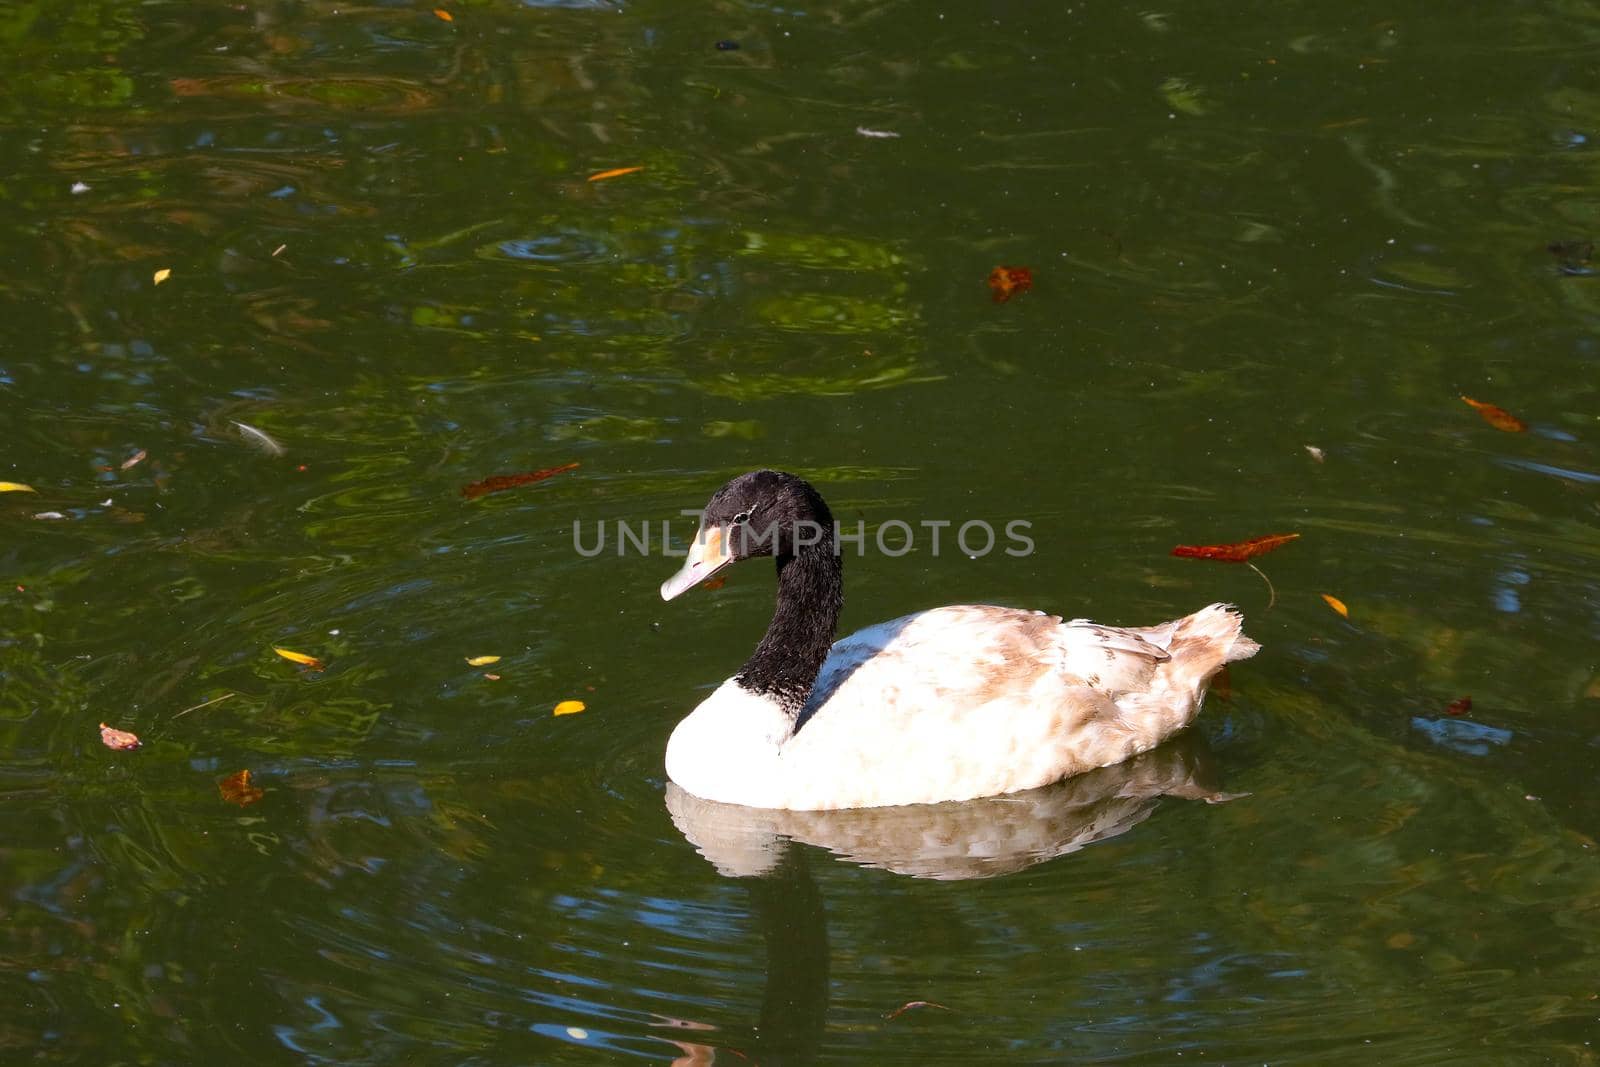 A wild duck swims on the lake. Migratory birds